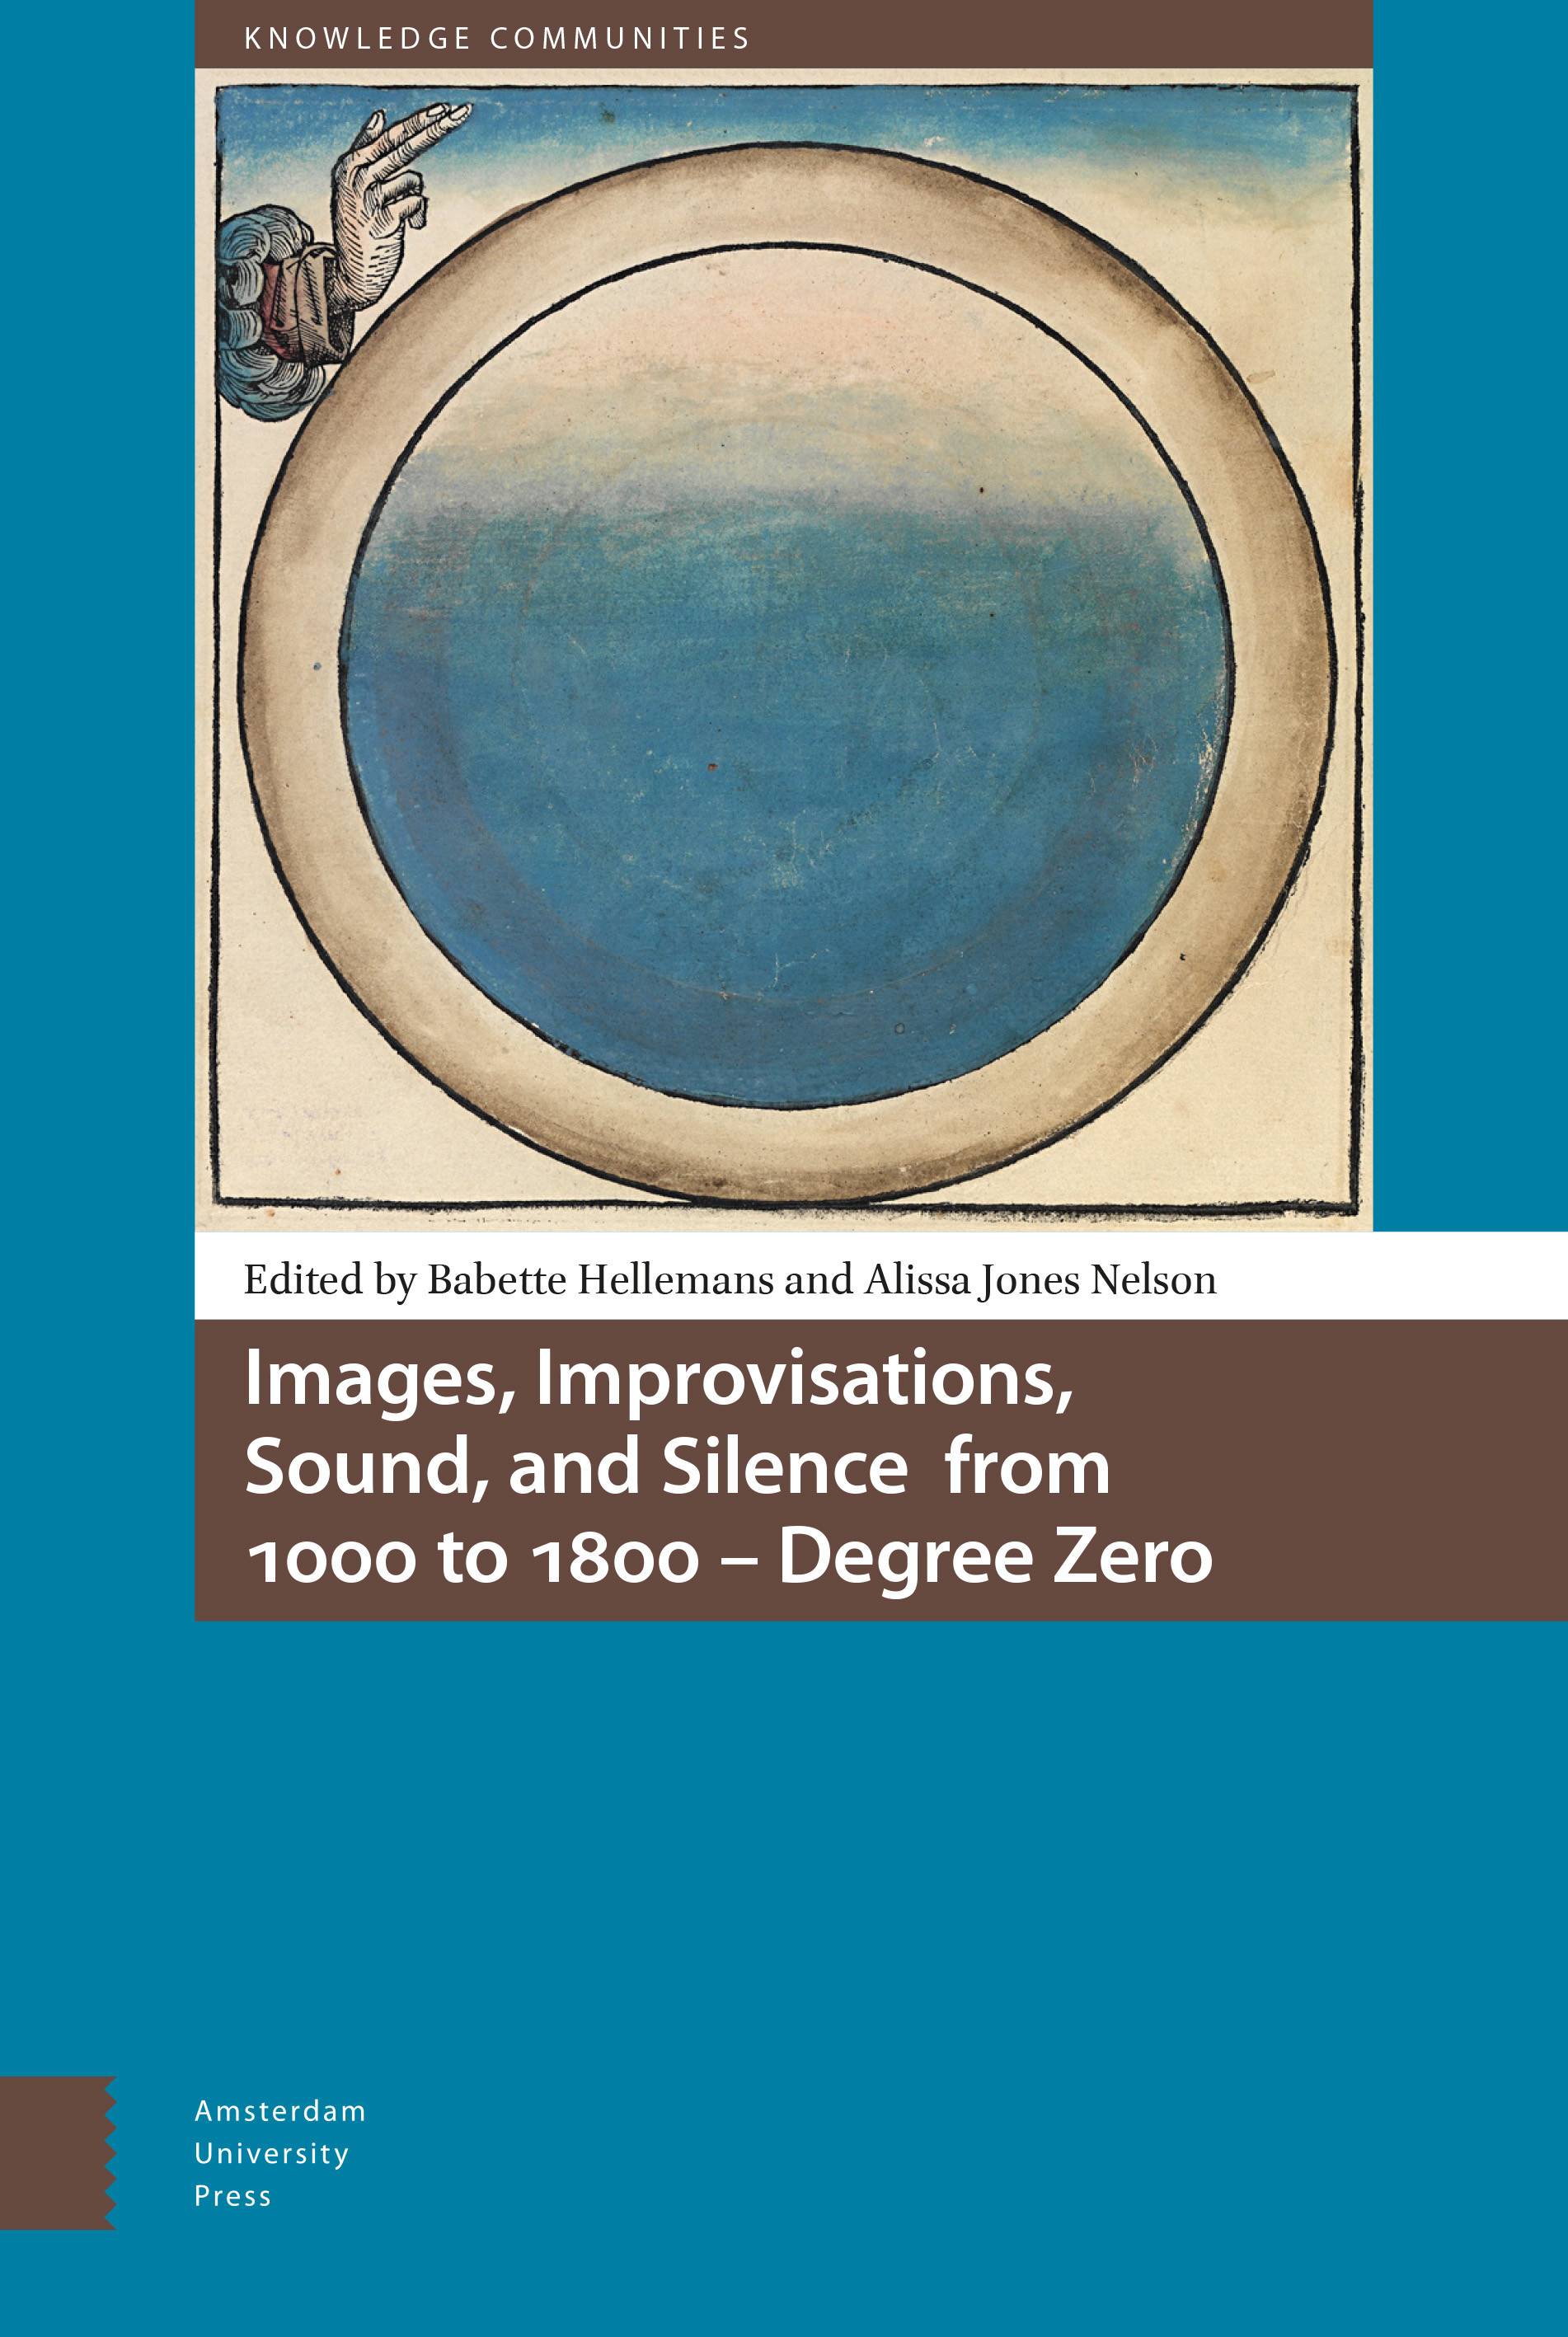 Images, Improvisations, Sound, and Silence from 1000 to 1800 -- Degree Zero